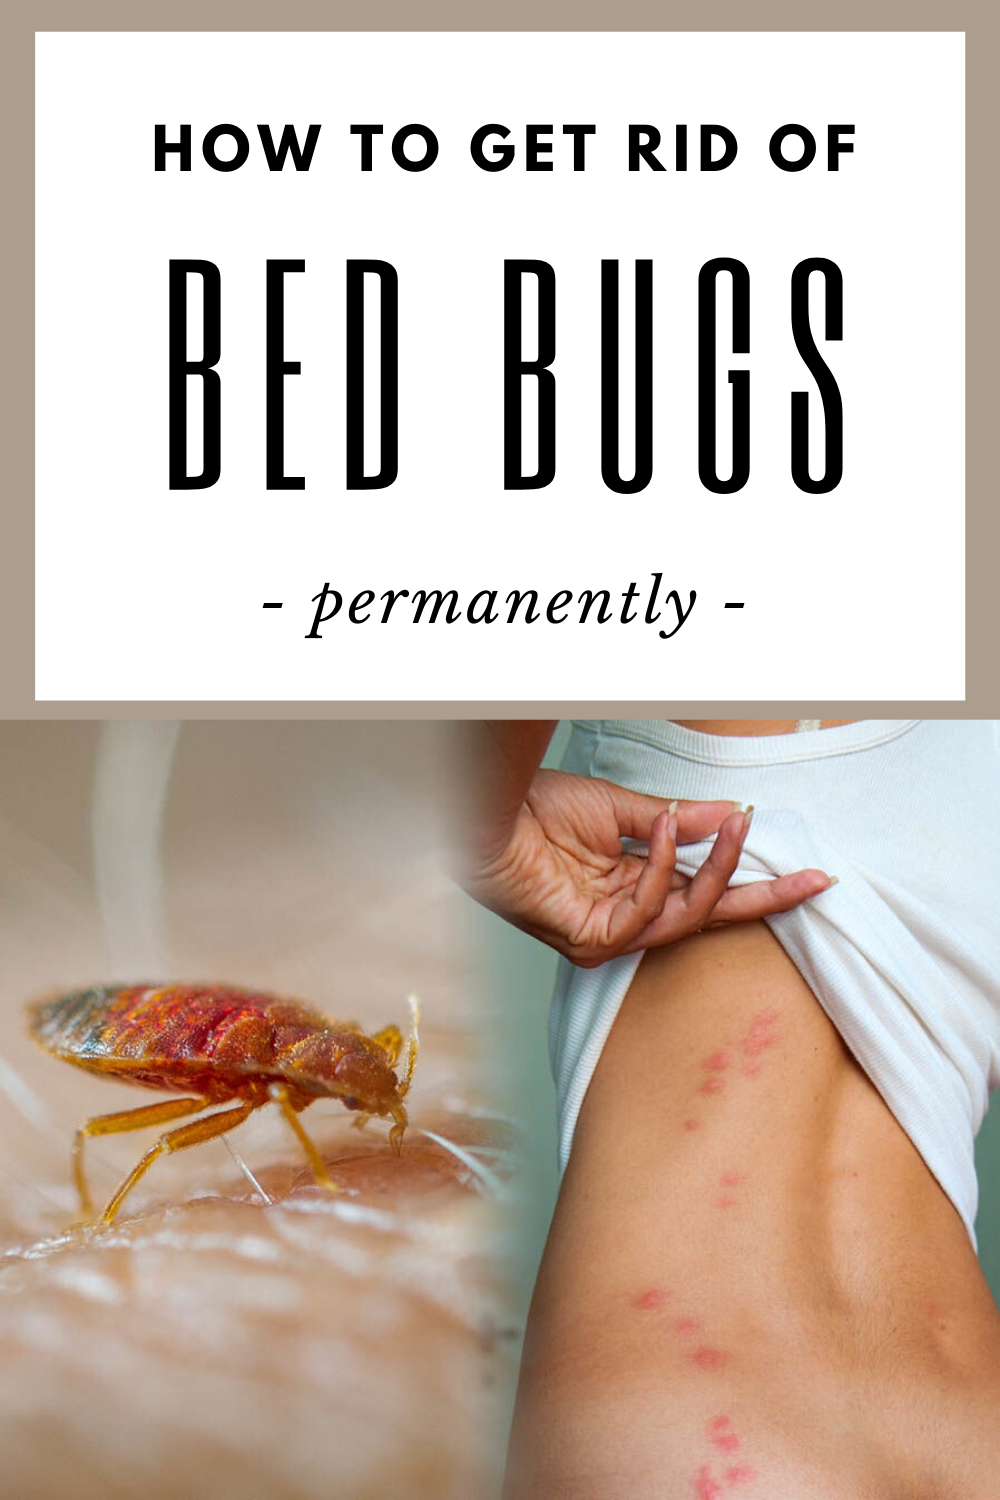 hiw to get rid of bed bugs